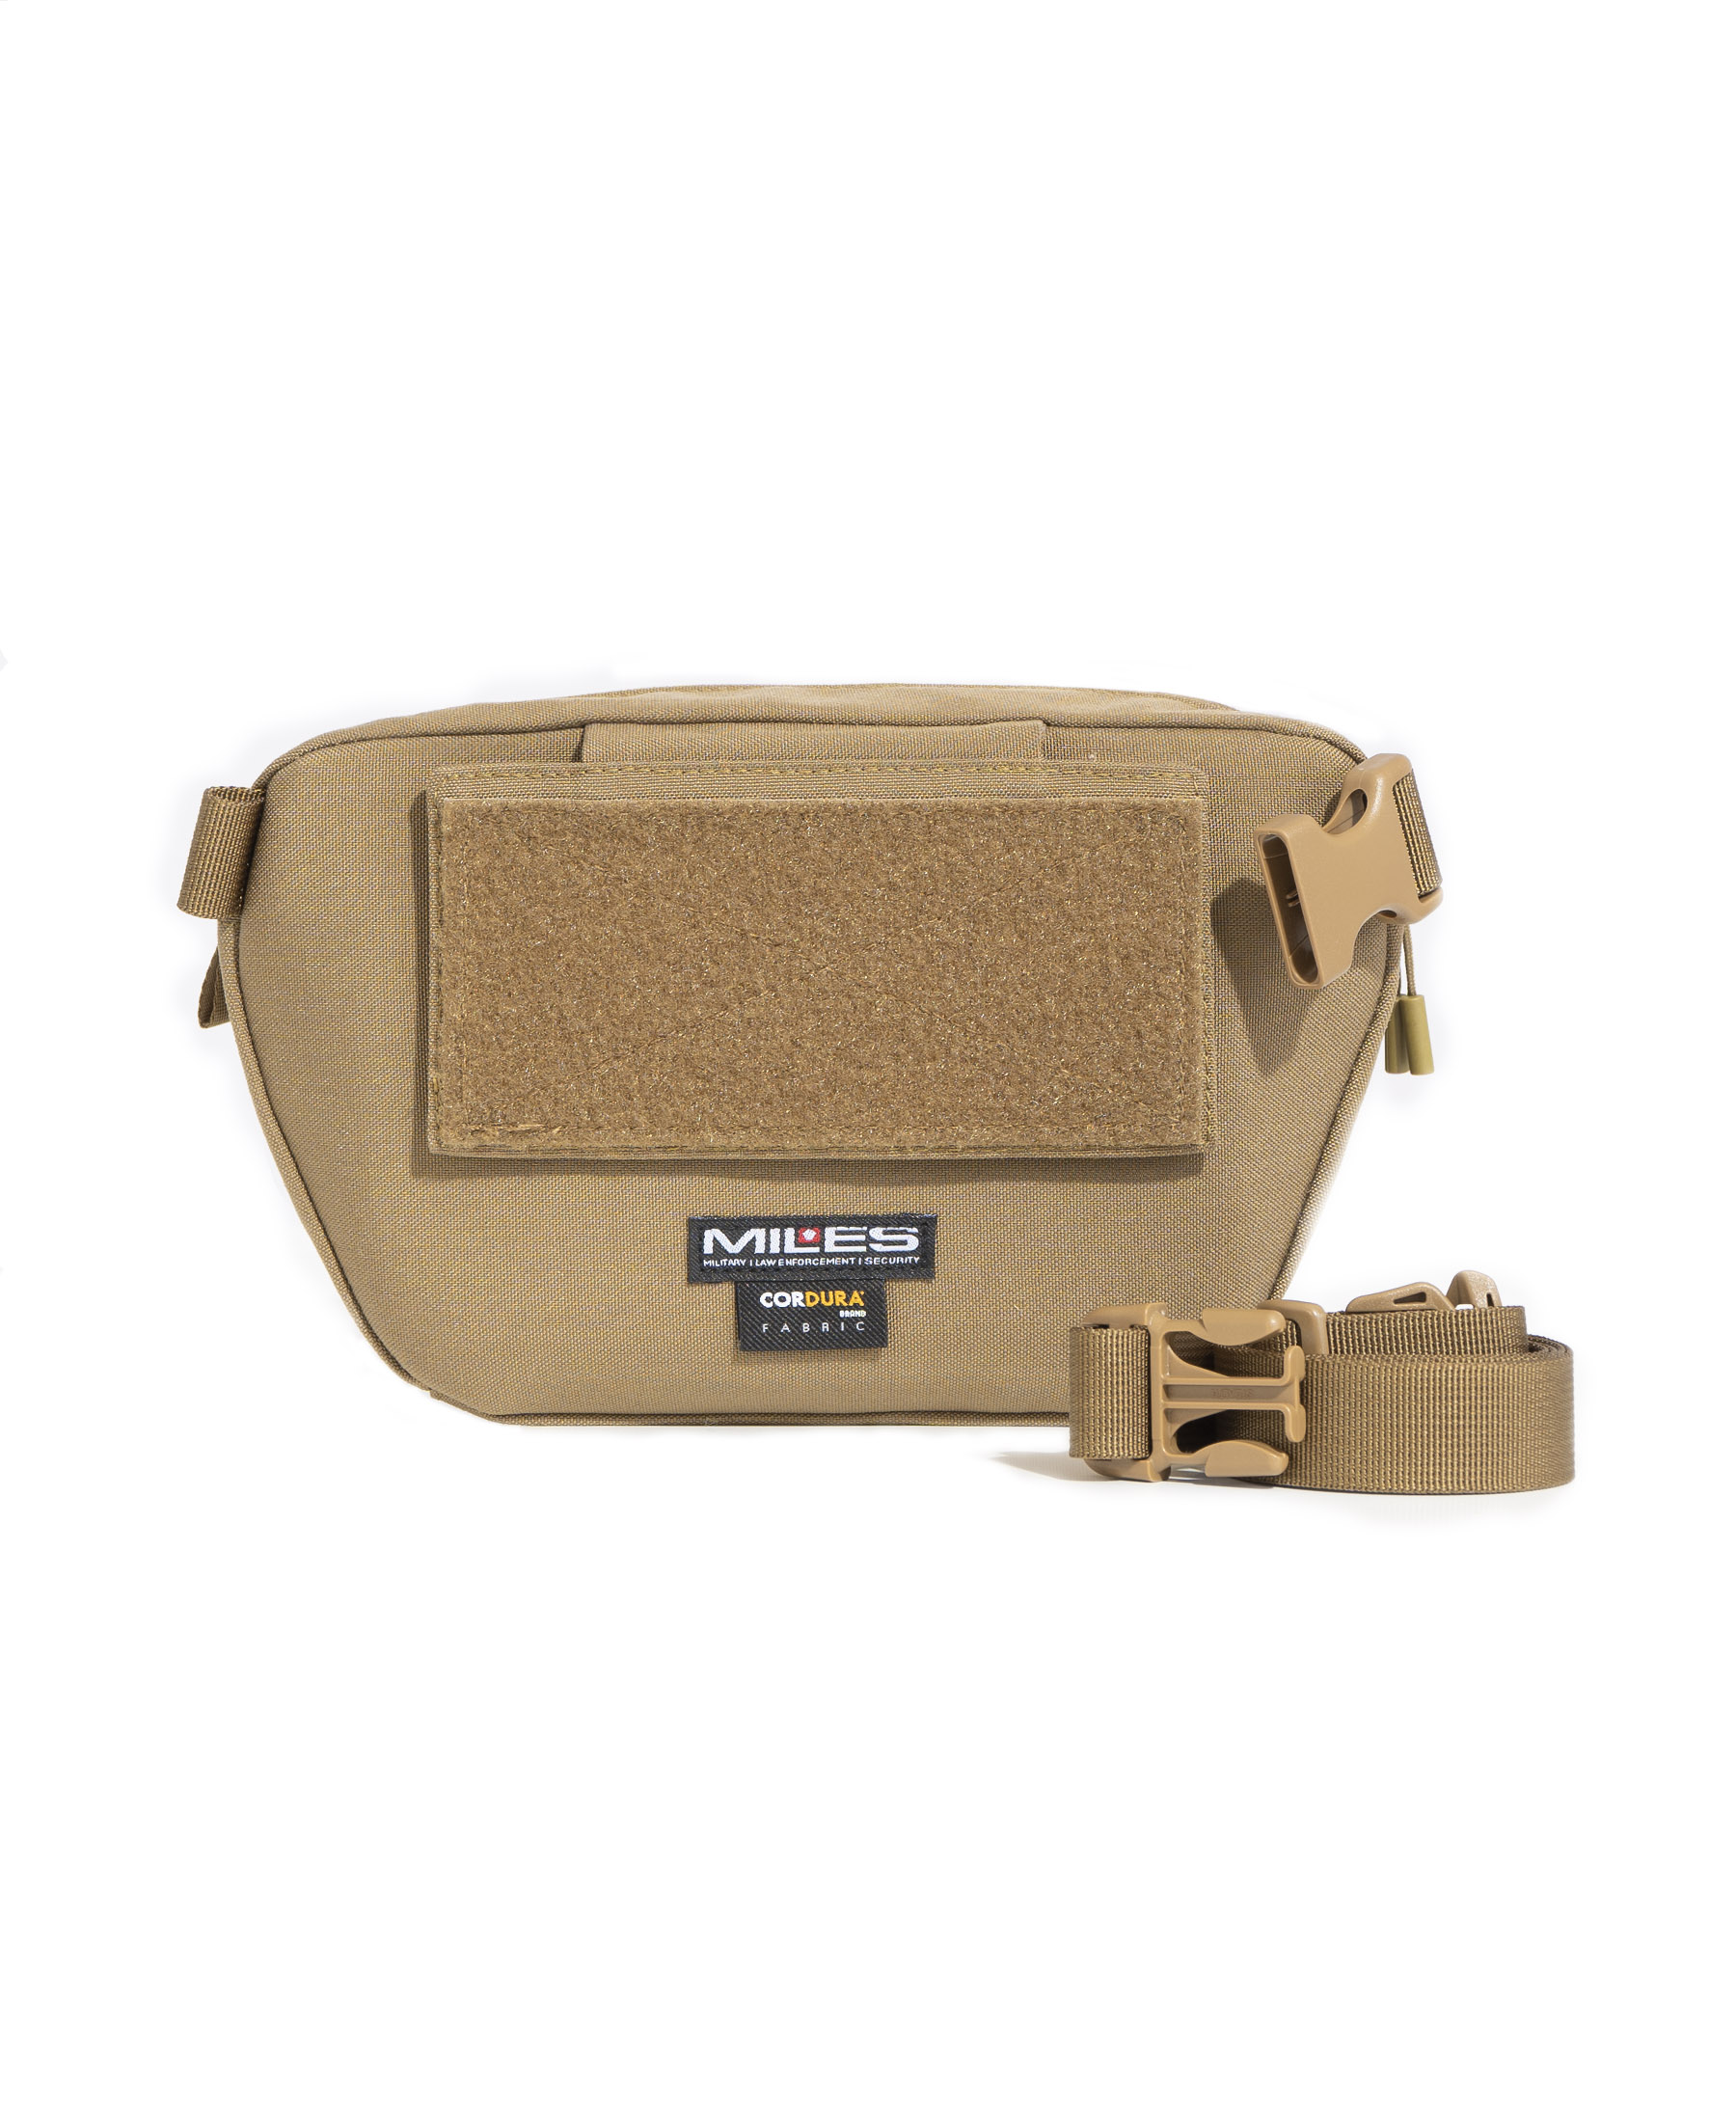 Bds Tactical Fanny Pack, Coyote